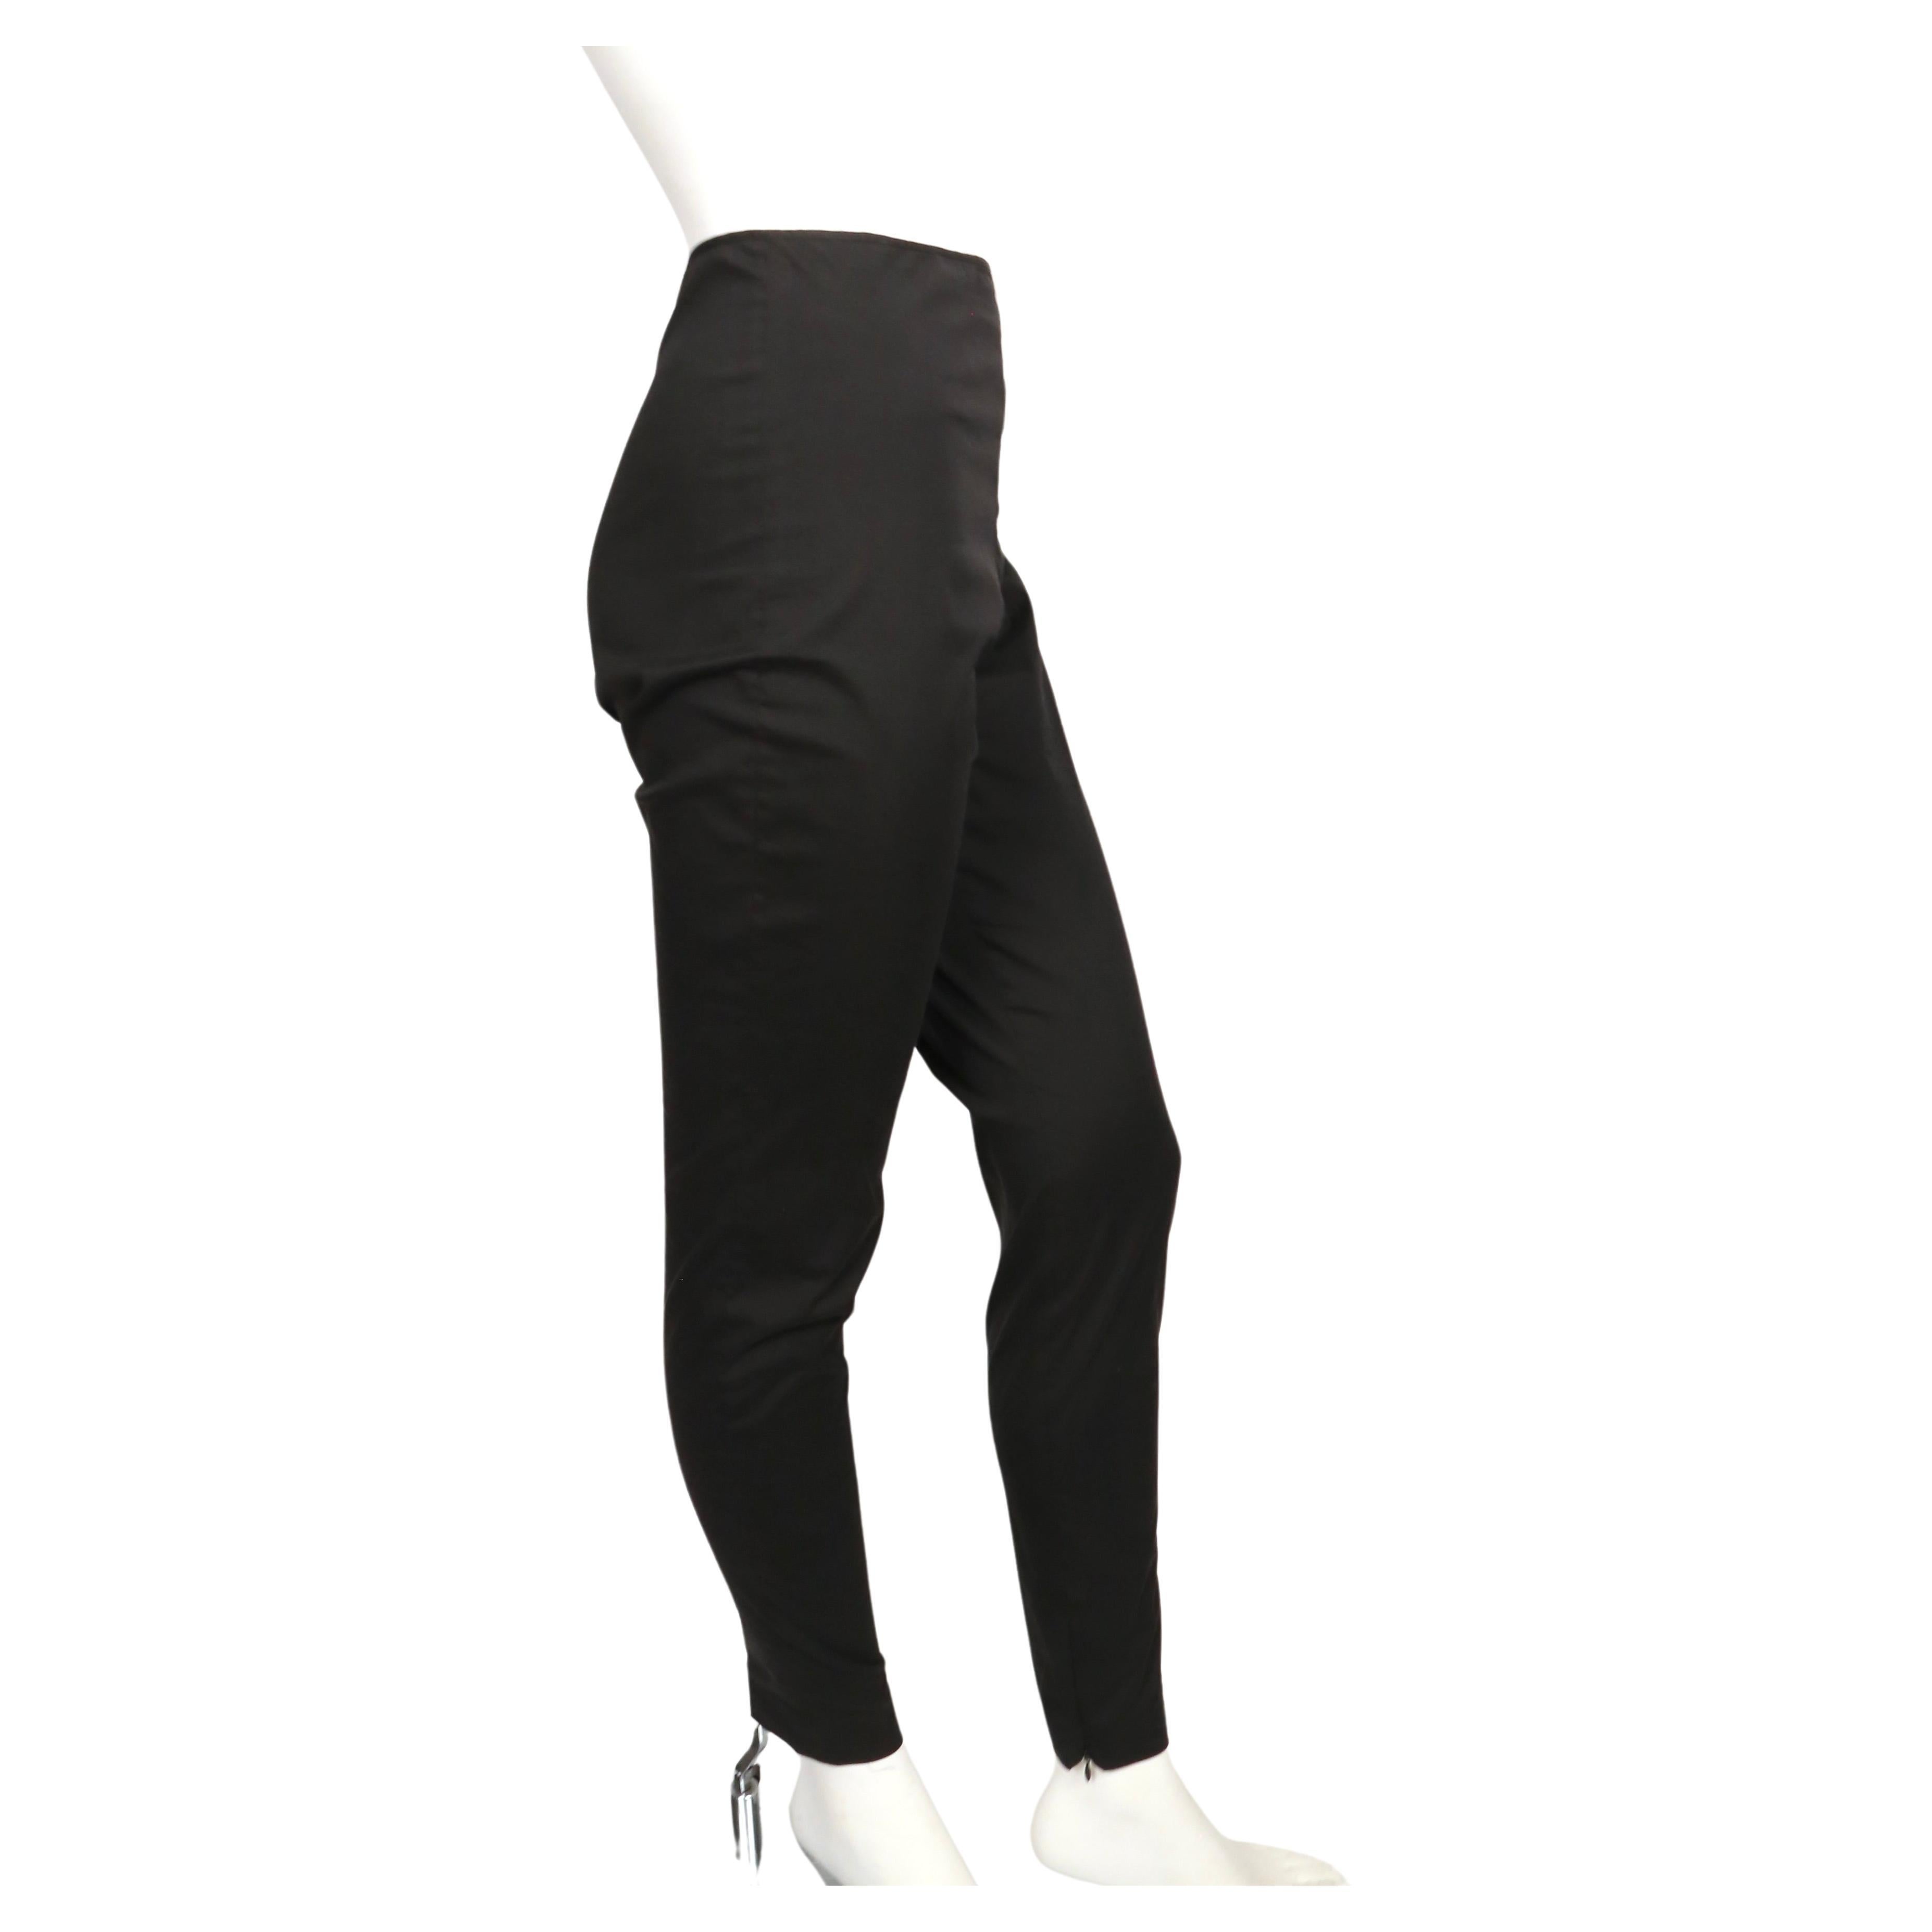 Women's 1990's JEAN PAUL GAULTIER black fitted high waisted pants For Sale